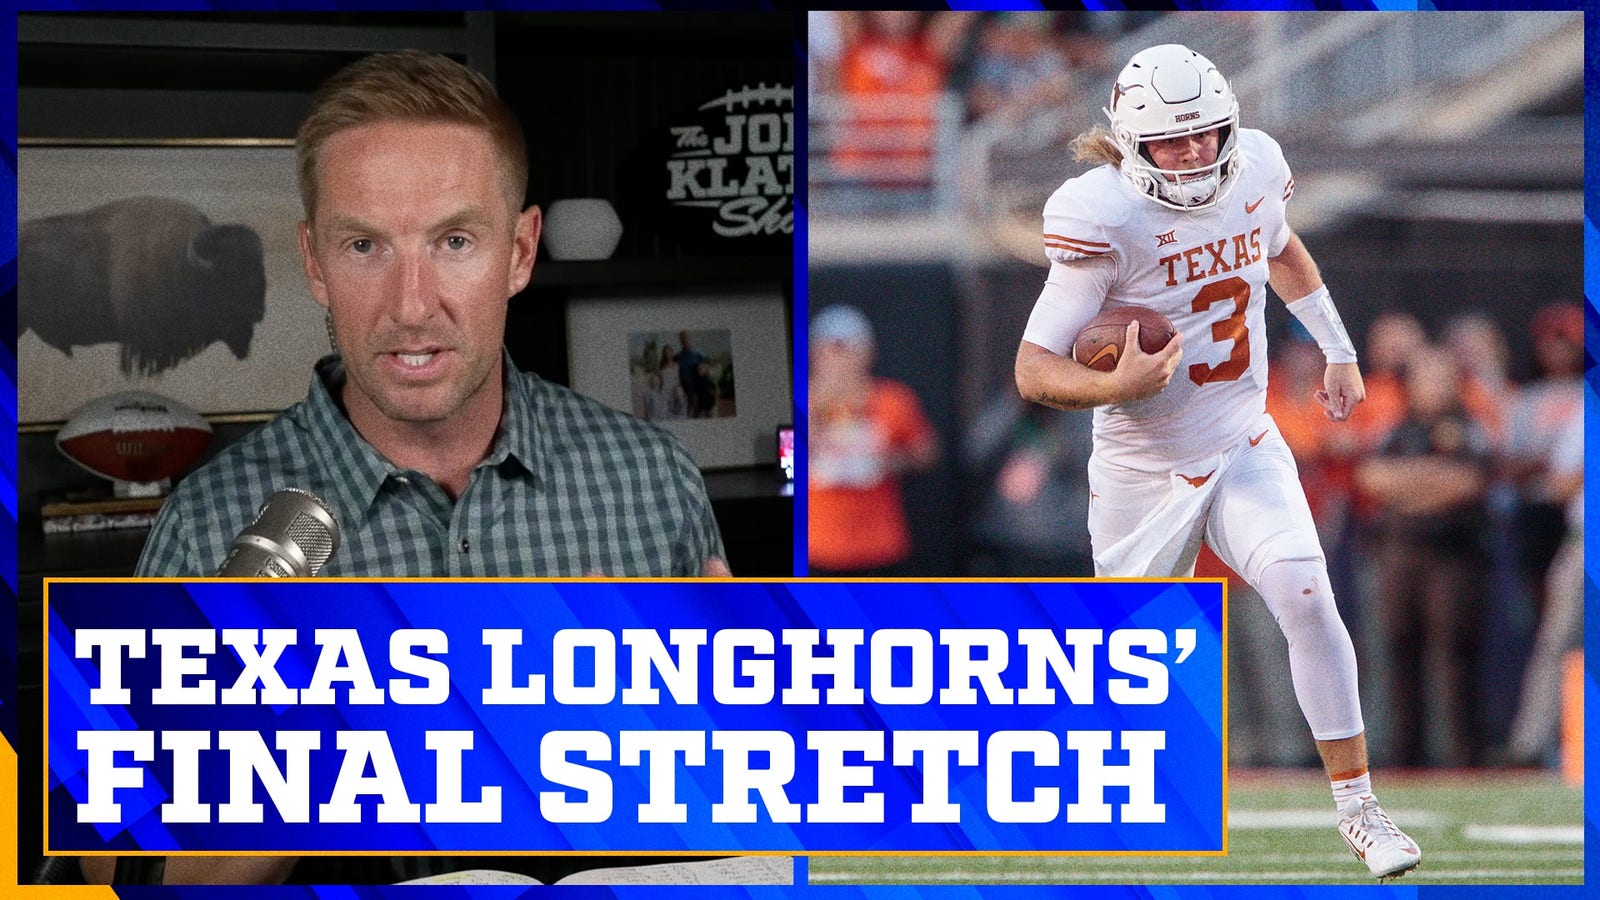 Will the Texas Longhorns end the season strong?